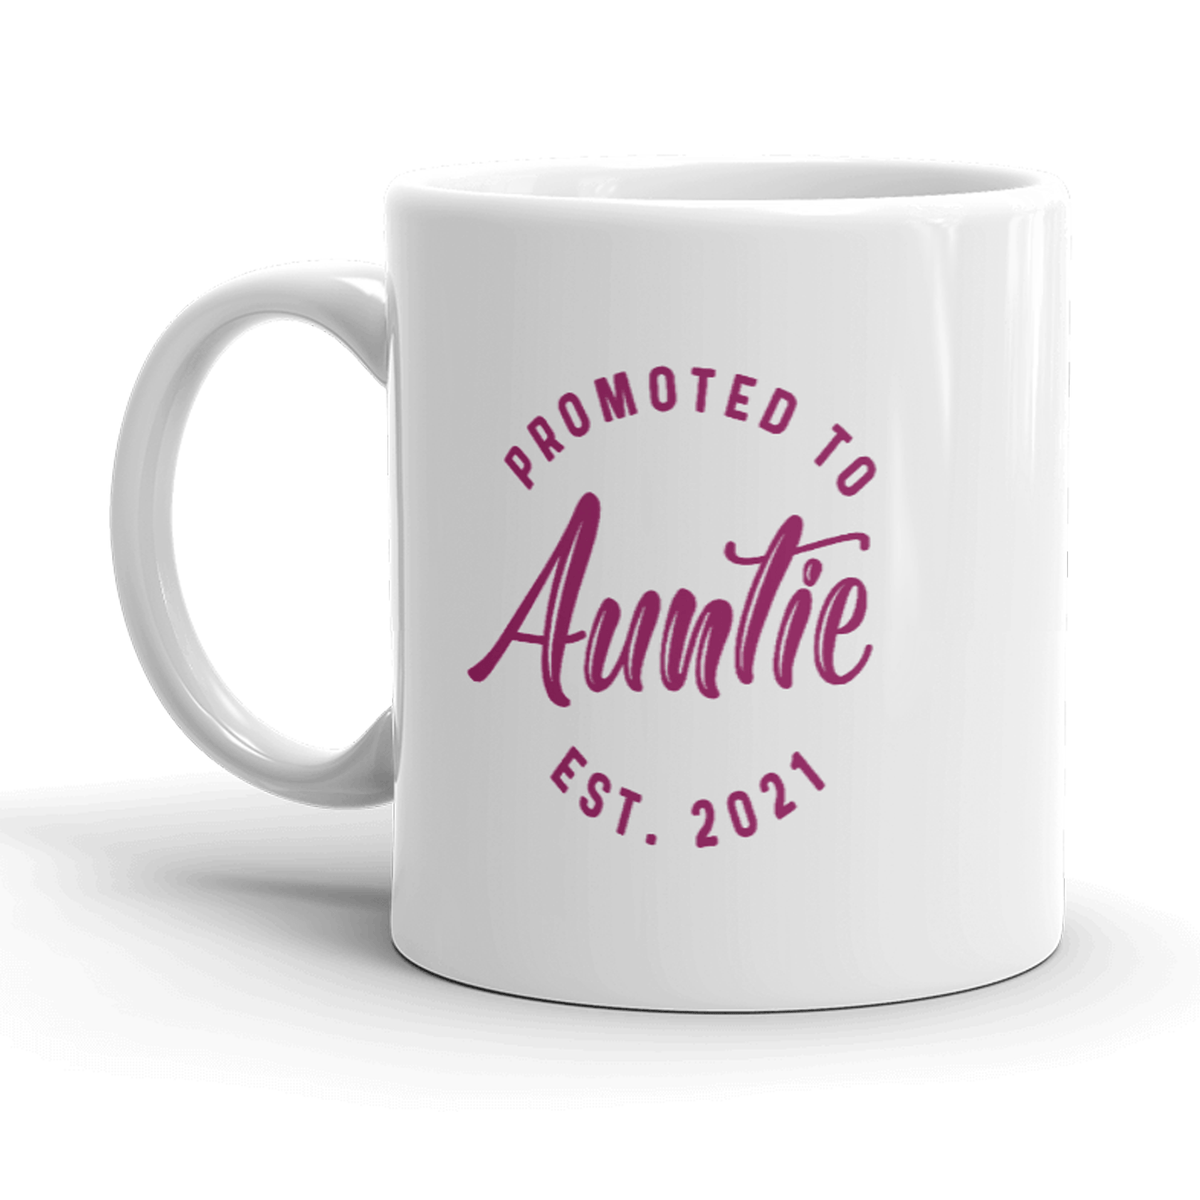 Promoted To Auntie 2021 Mug Funny New Baby Family Graphic Coffee Cup-11oz - Crazy Dog T-Shirts